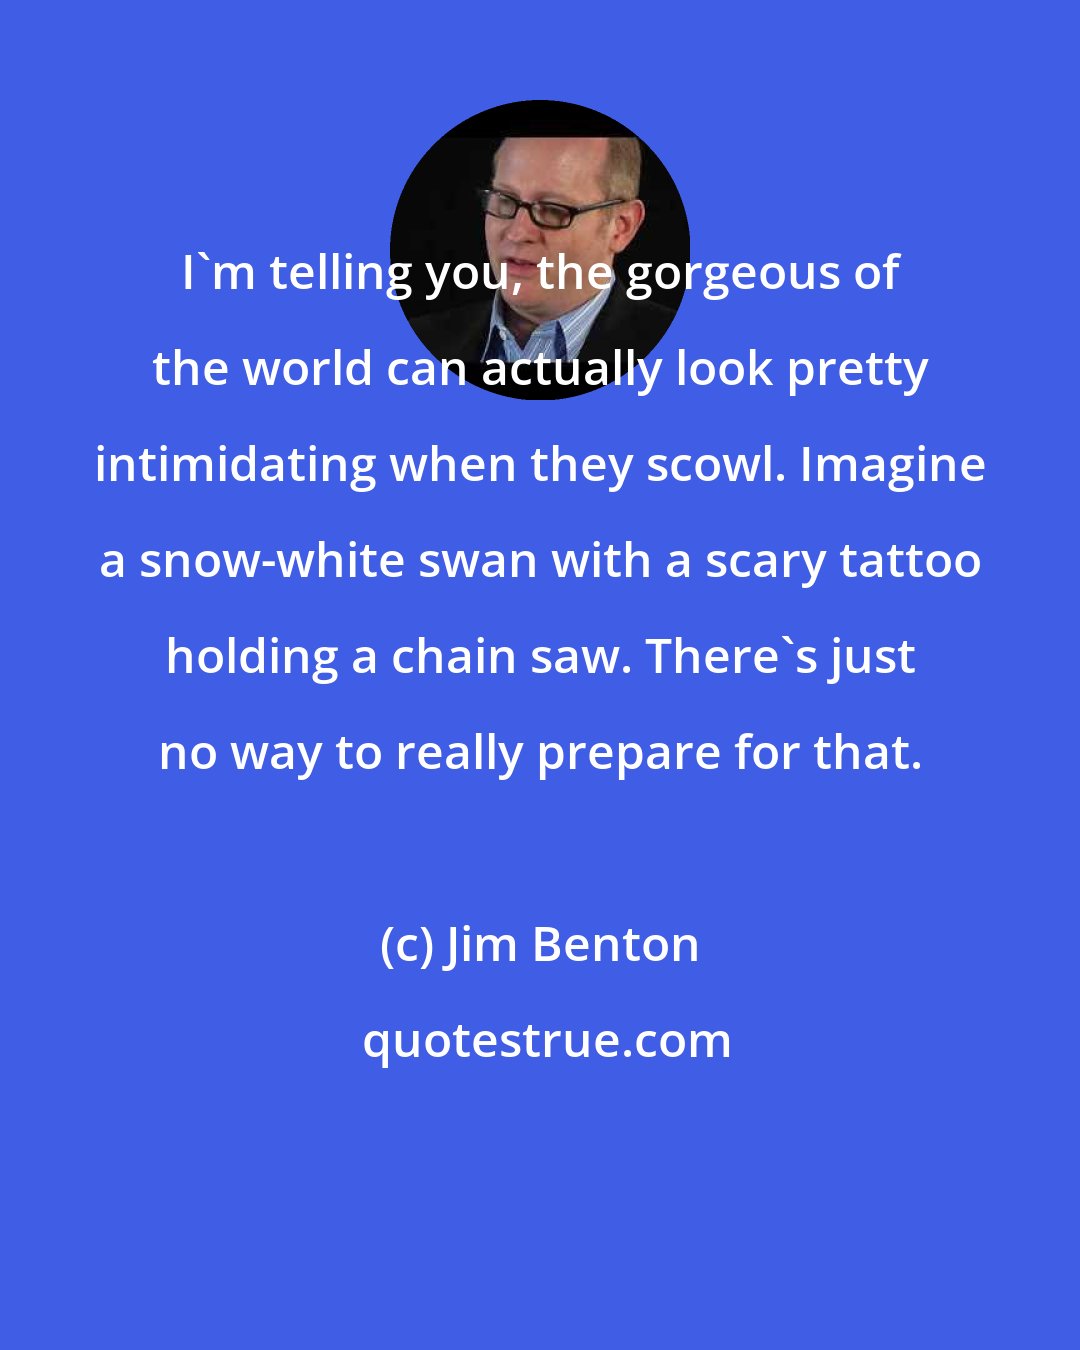 Jim Benton: I'm telling you, the gorgeous of the world can actually look pretty intimidating when they scowl. Imagine a snow-white swan with a scary tattoo holding a chain saw. There's just no way to really prepare for that.